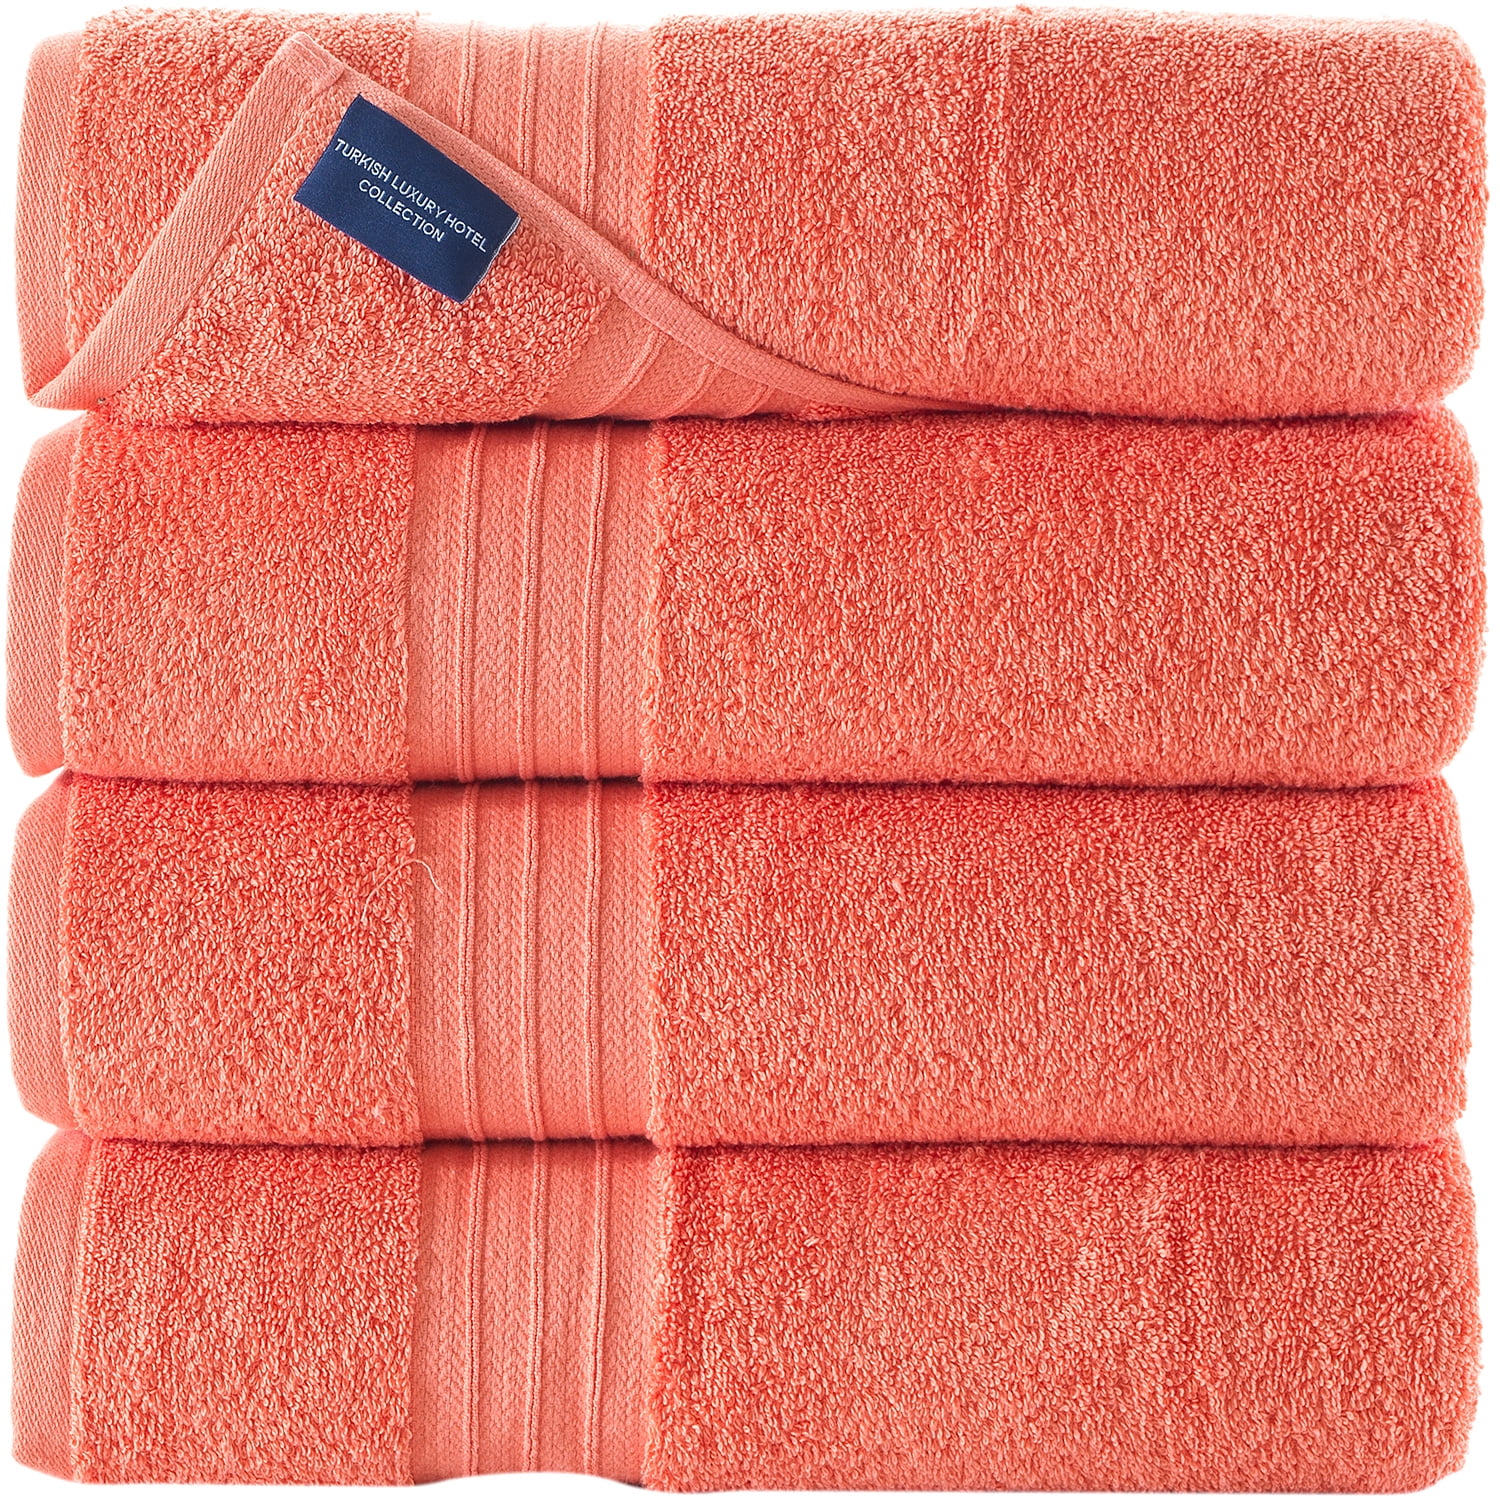 Qute Home 4-Piece Bath Towels Set, 100% Turkish Cotton Premium Quality  Towels for Bathroom, Quick Dry Soft and Absorbent Turkish Towel, Set  Includes 4